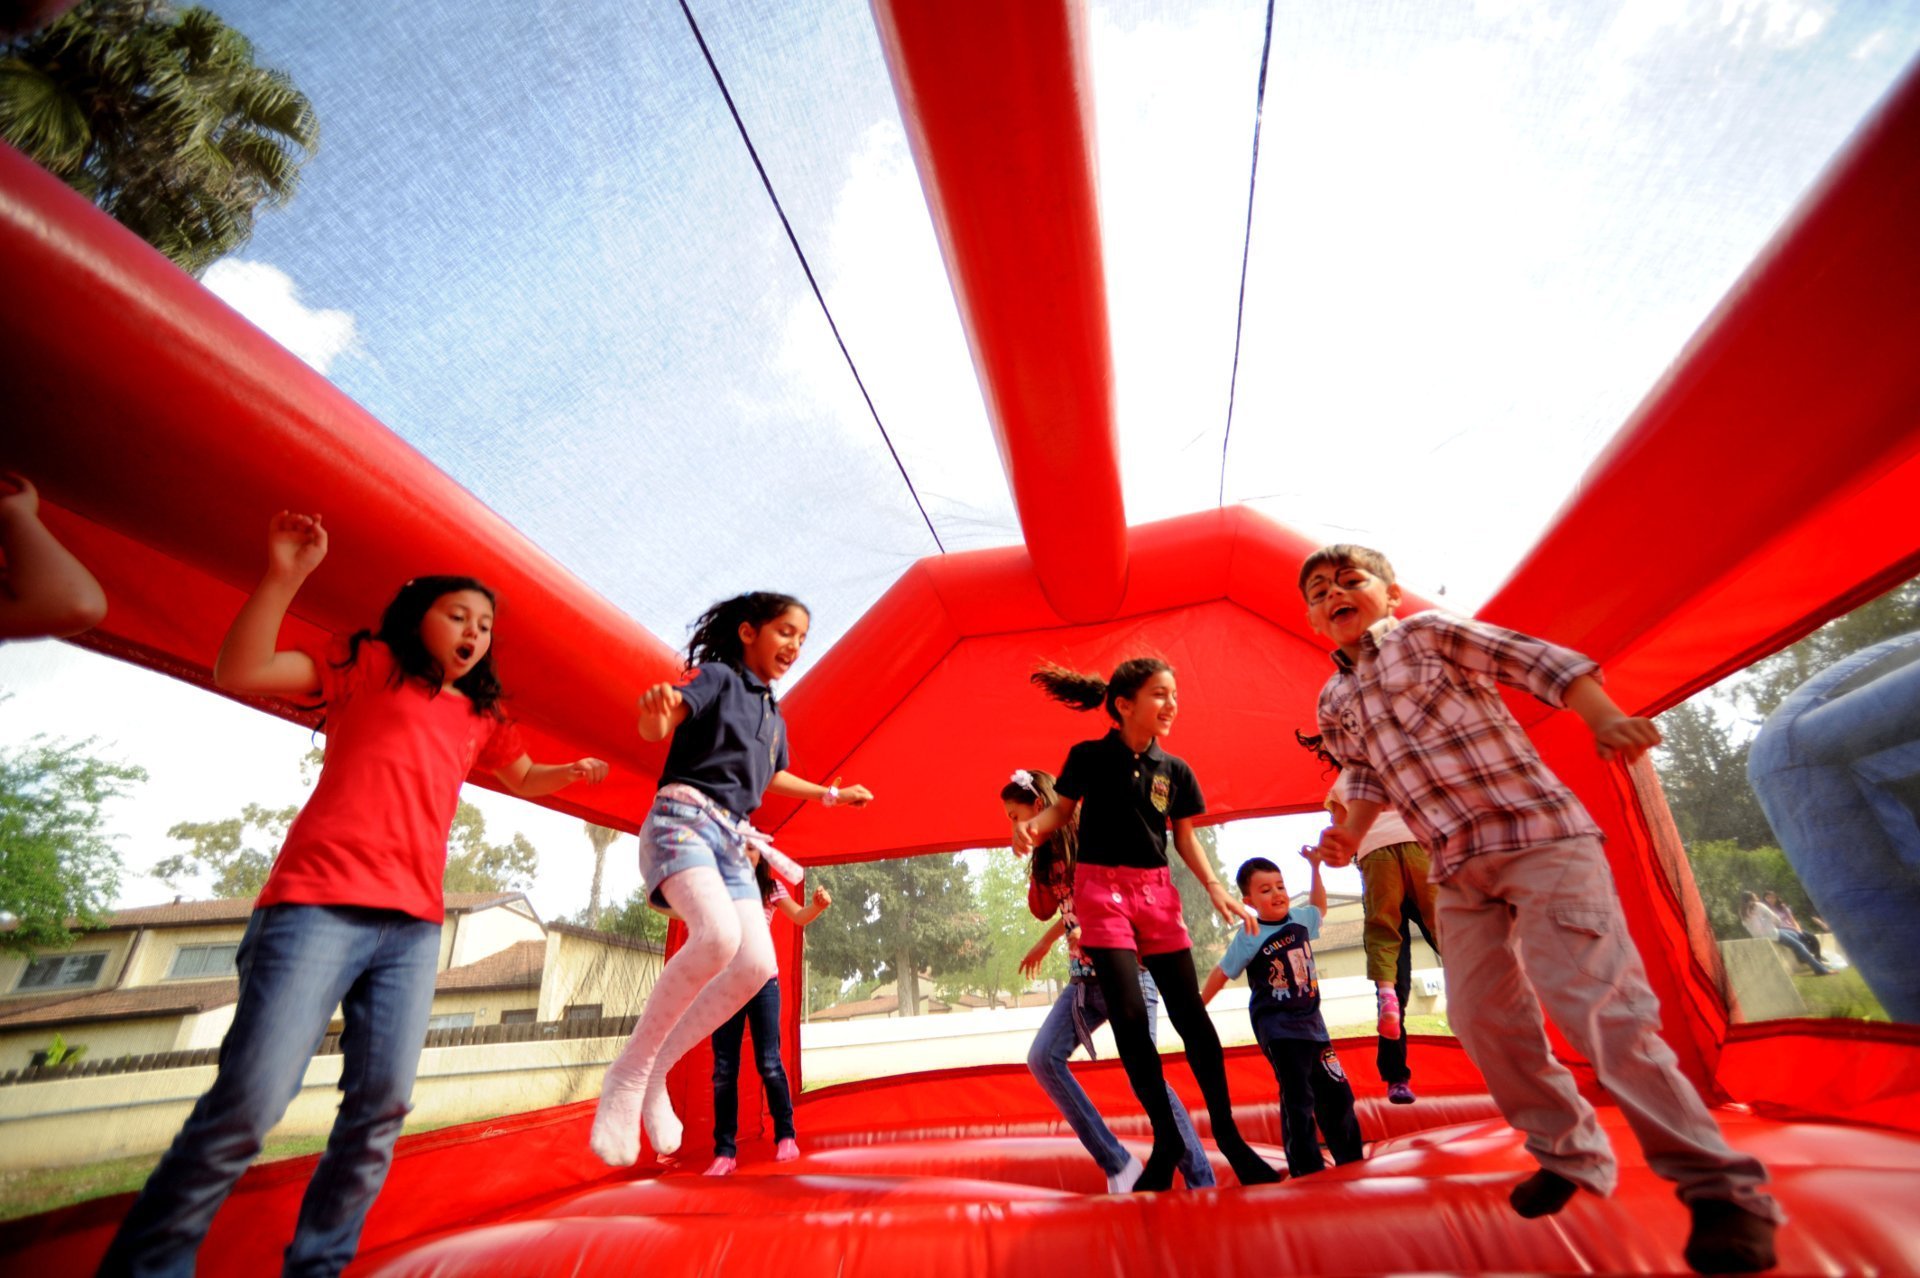 Red bounce house